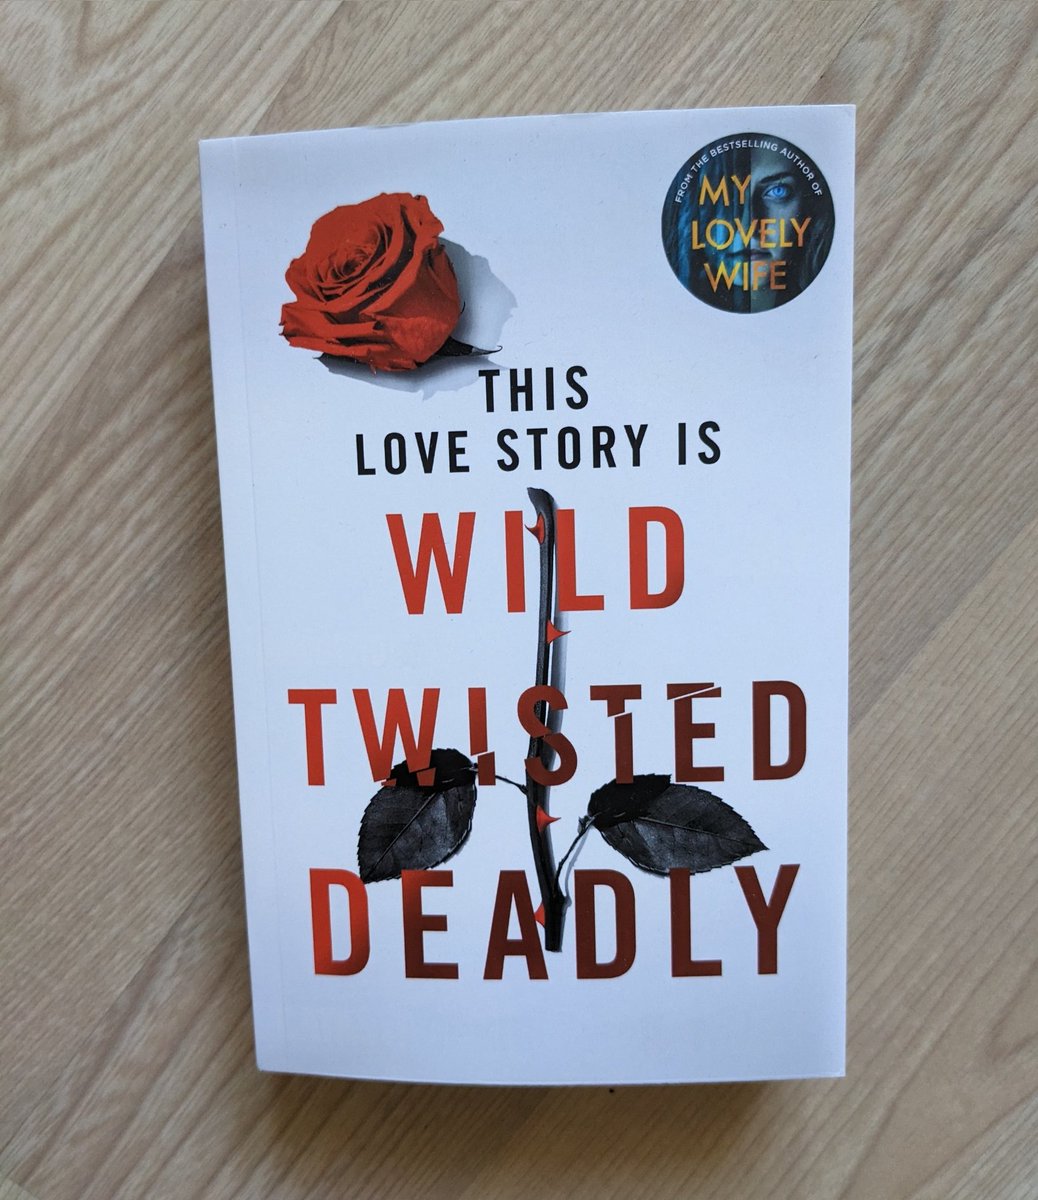 AD/PR PRODUCT 📚 BOOK MAIL

Thank you @MichaelJBooks Love a new @smariedowning and A Twisted Love Story sounds brilliant!

#bookmail #atwistedlovestory #samanthadowning #booktwt
#BookTwitter #uptoolatereading